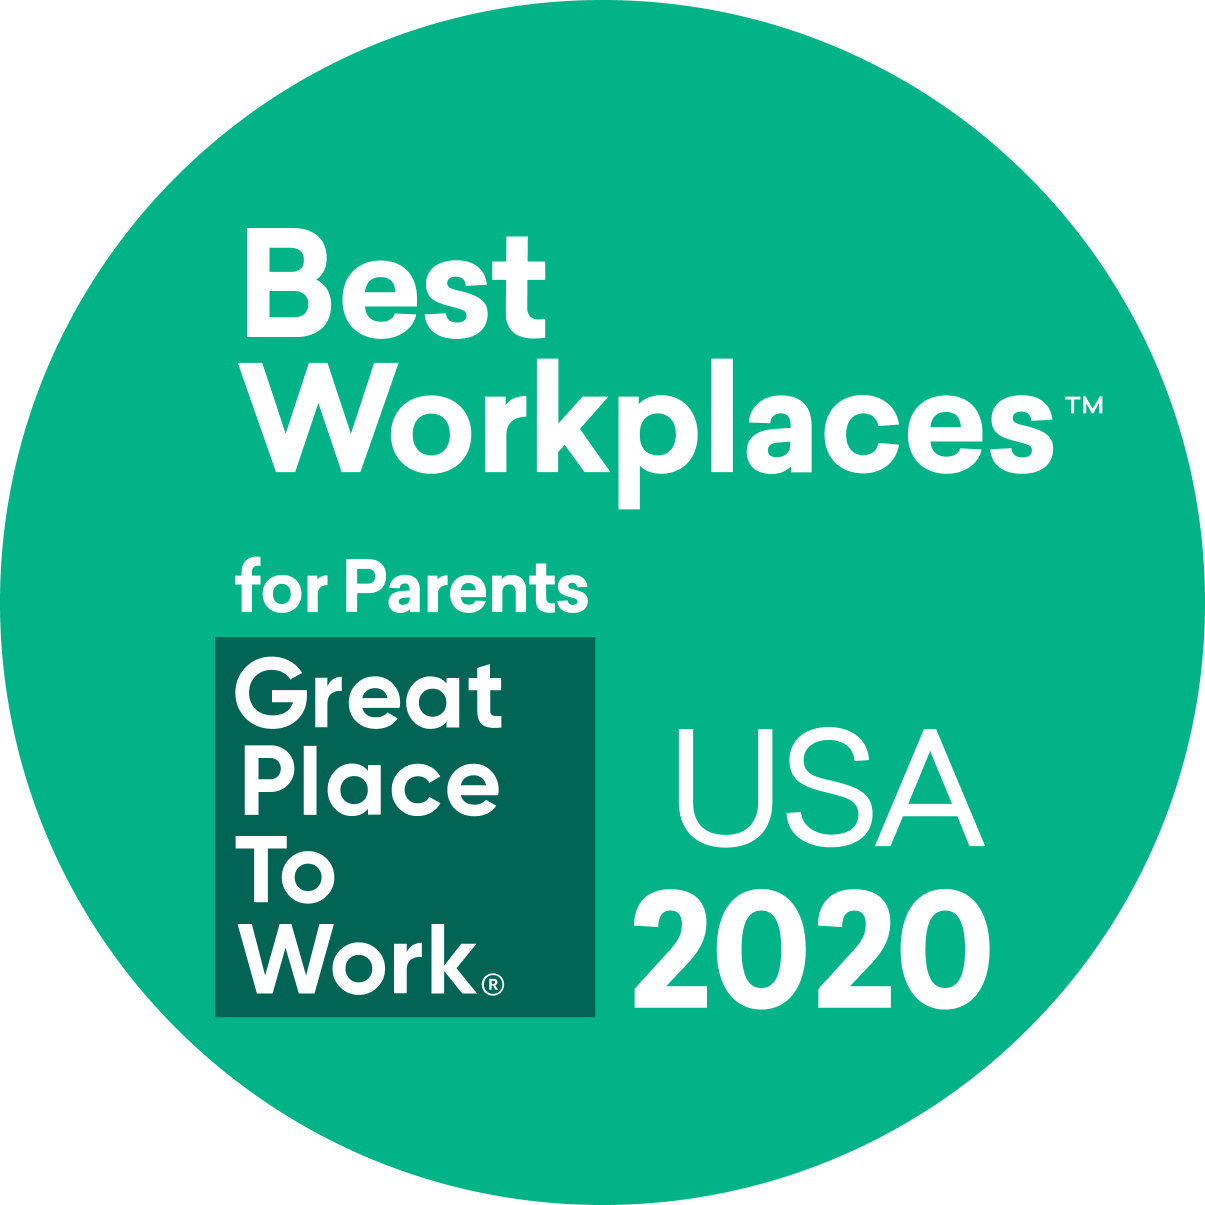 Invoca named a Besty Workplaces Award - 2020